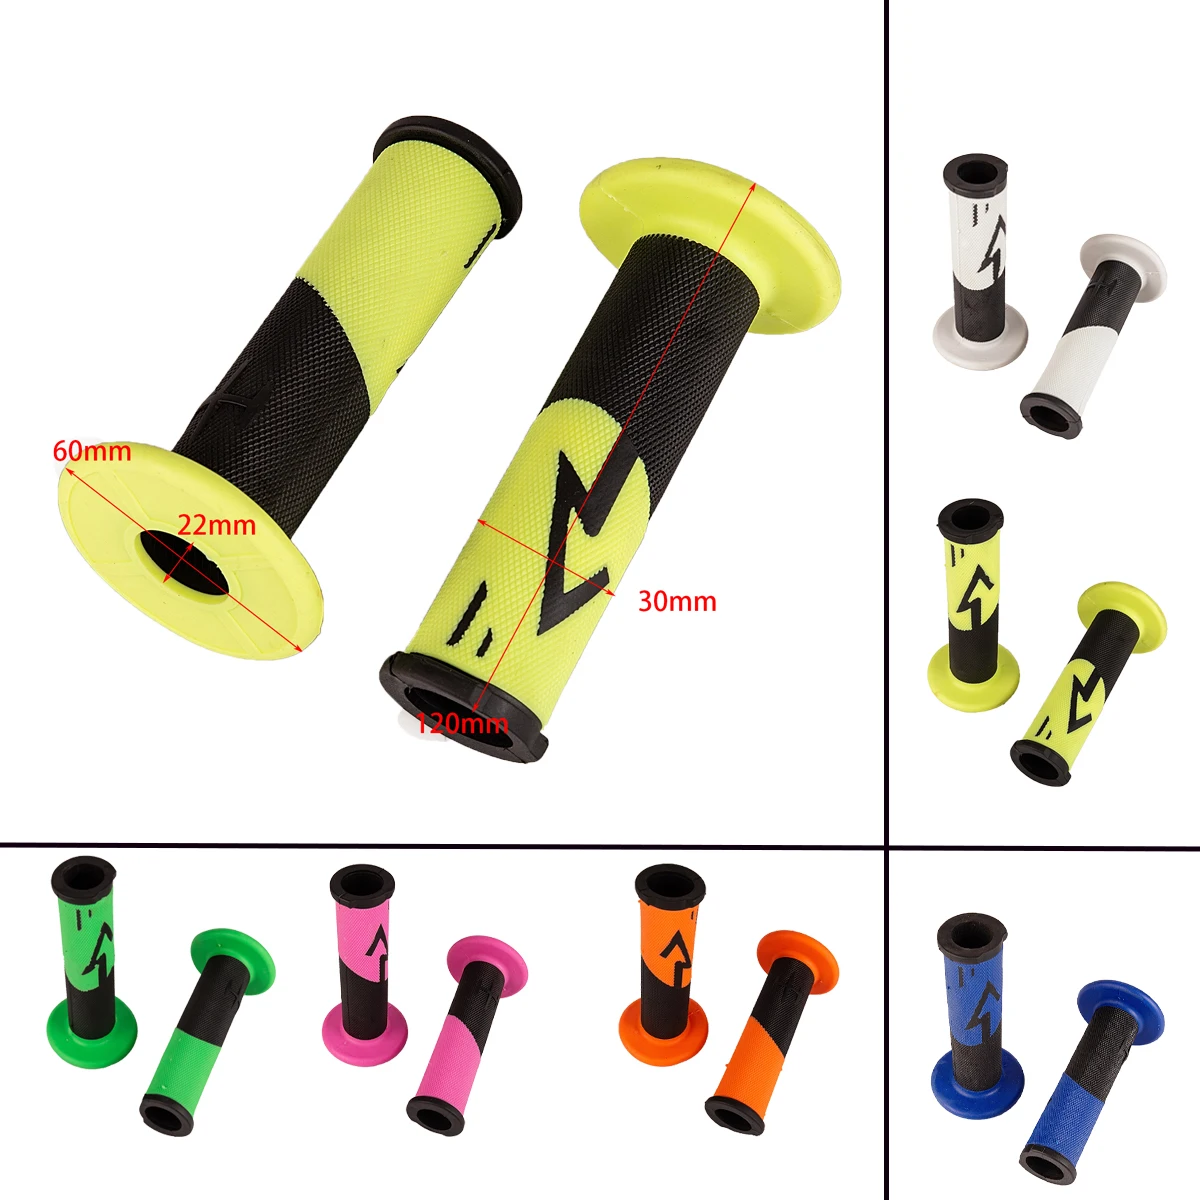 

Universal Soft Rubber 22mm 7/8" Hand Grips For CRF KLX YZF SX EXC BMW MX Pit Dirt Bike Motorcycle